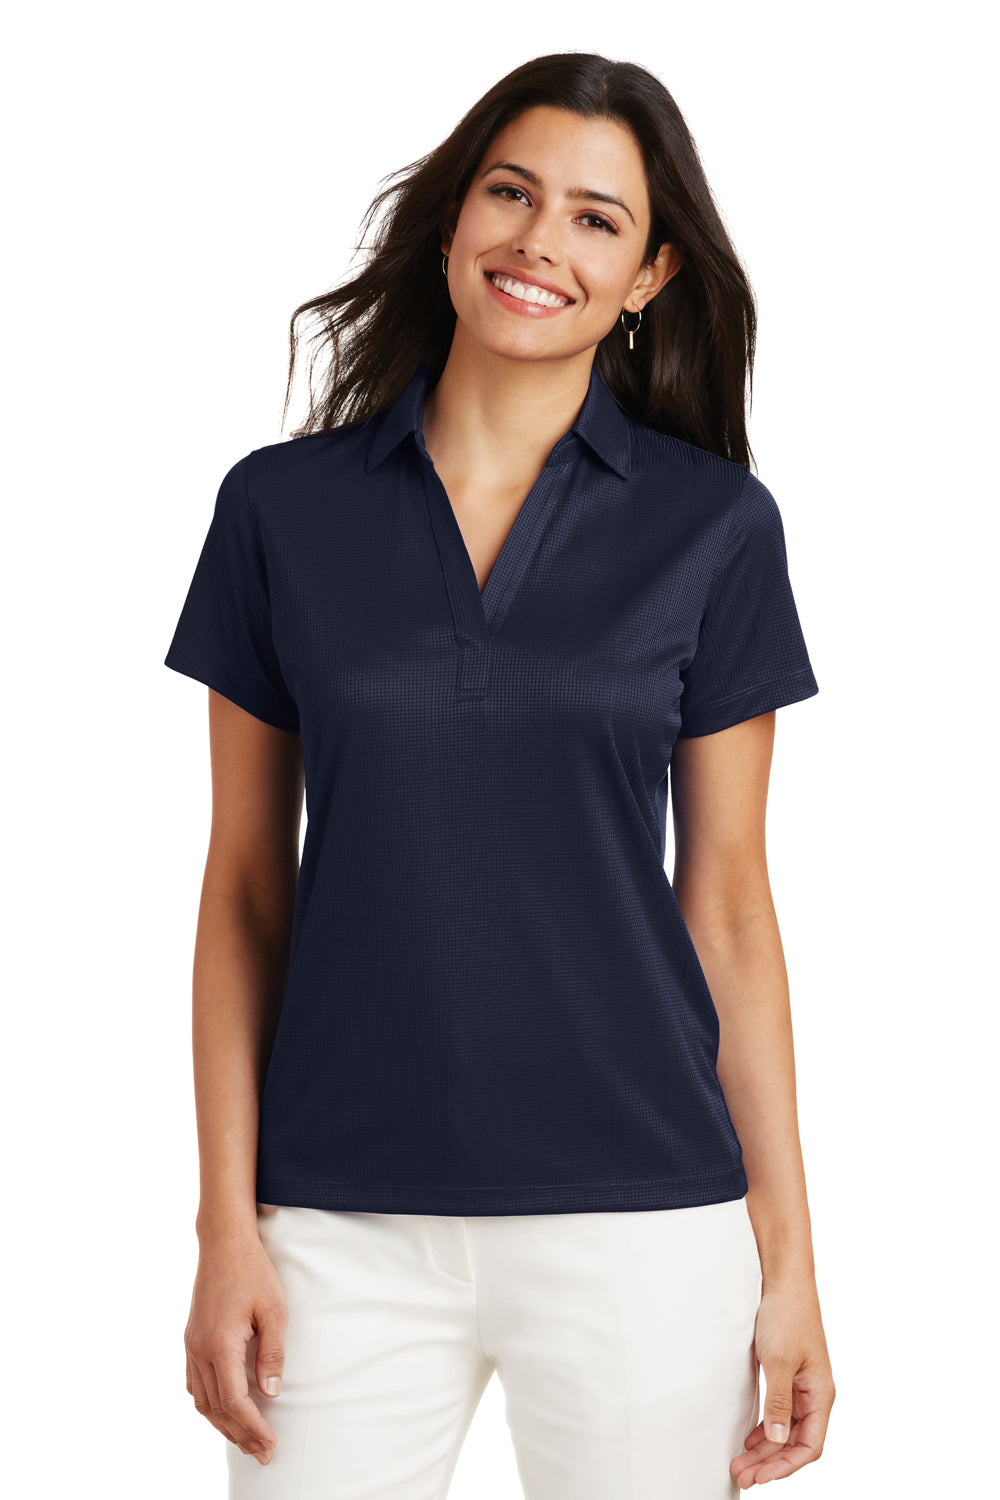 Port Authority L528 Womens Performance Moisture Wicking Short Sleeve Polo Shirt Navy Blue Front